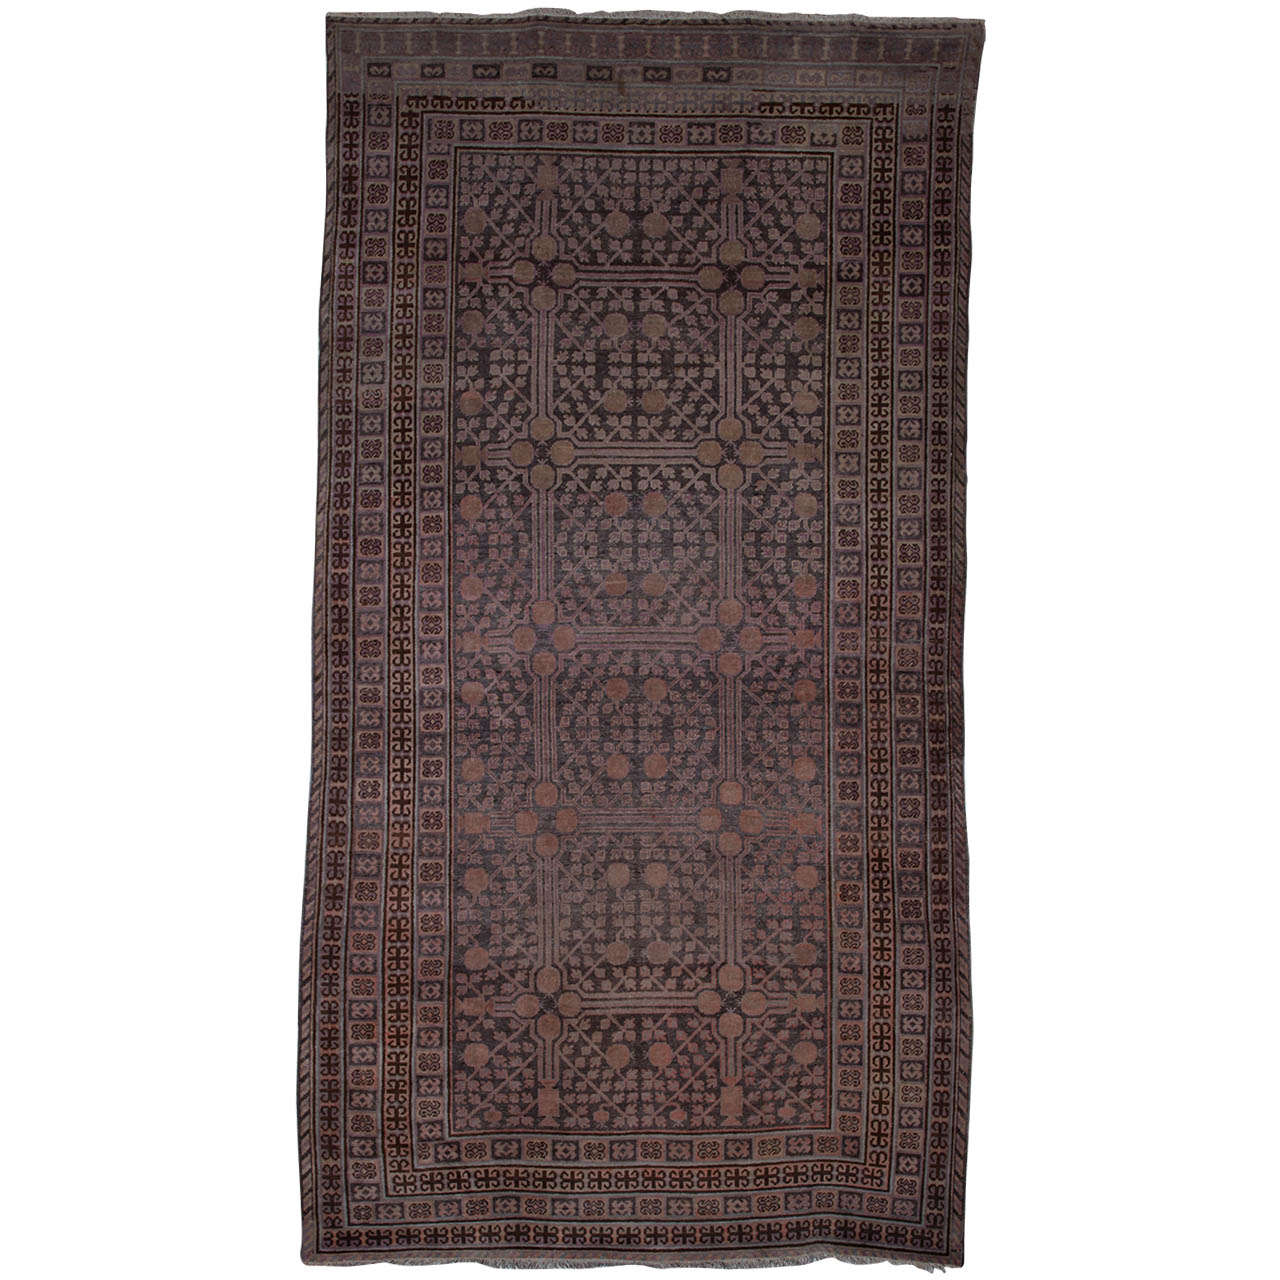 Rare Antique Kothan Carpet or Rug late 19th Century  For Sale